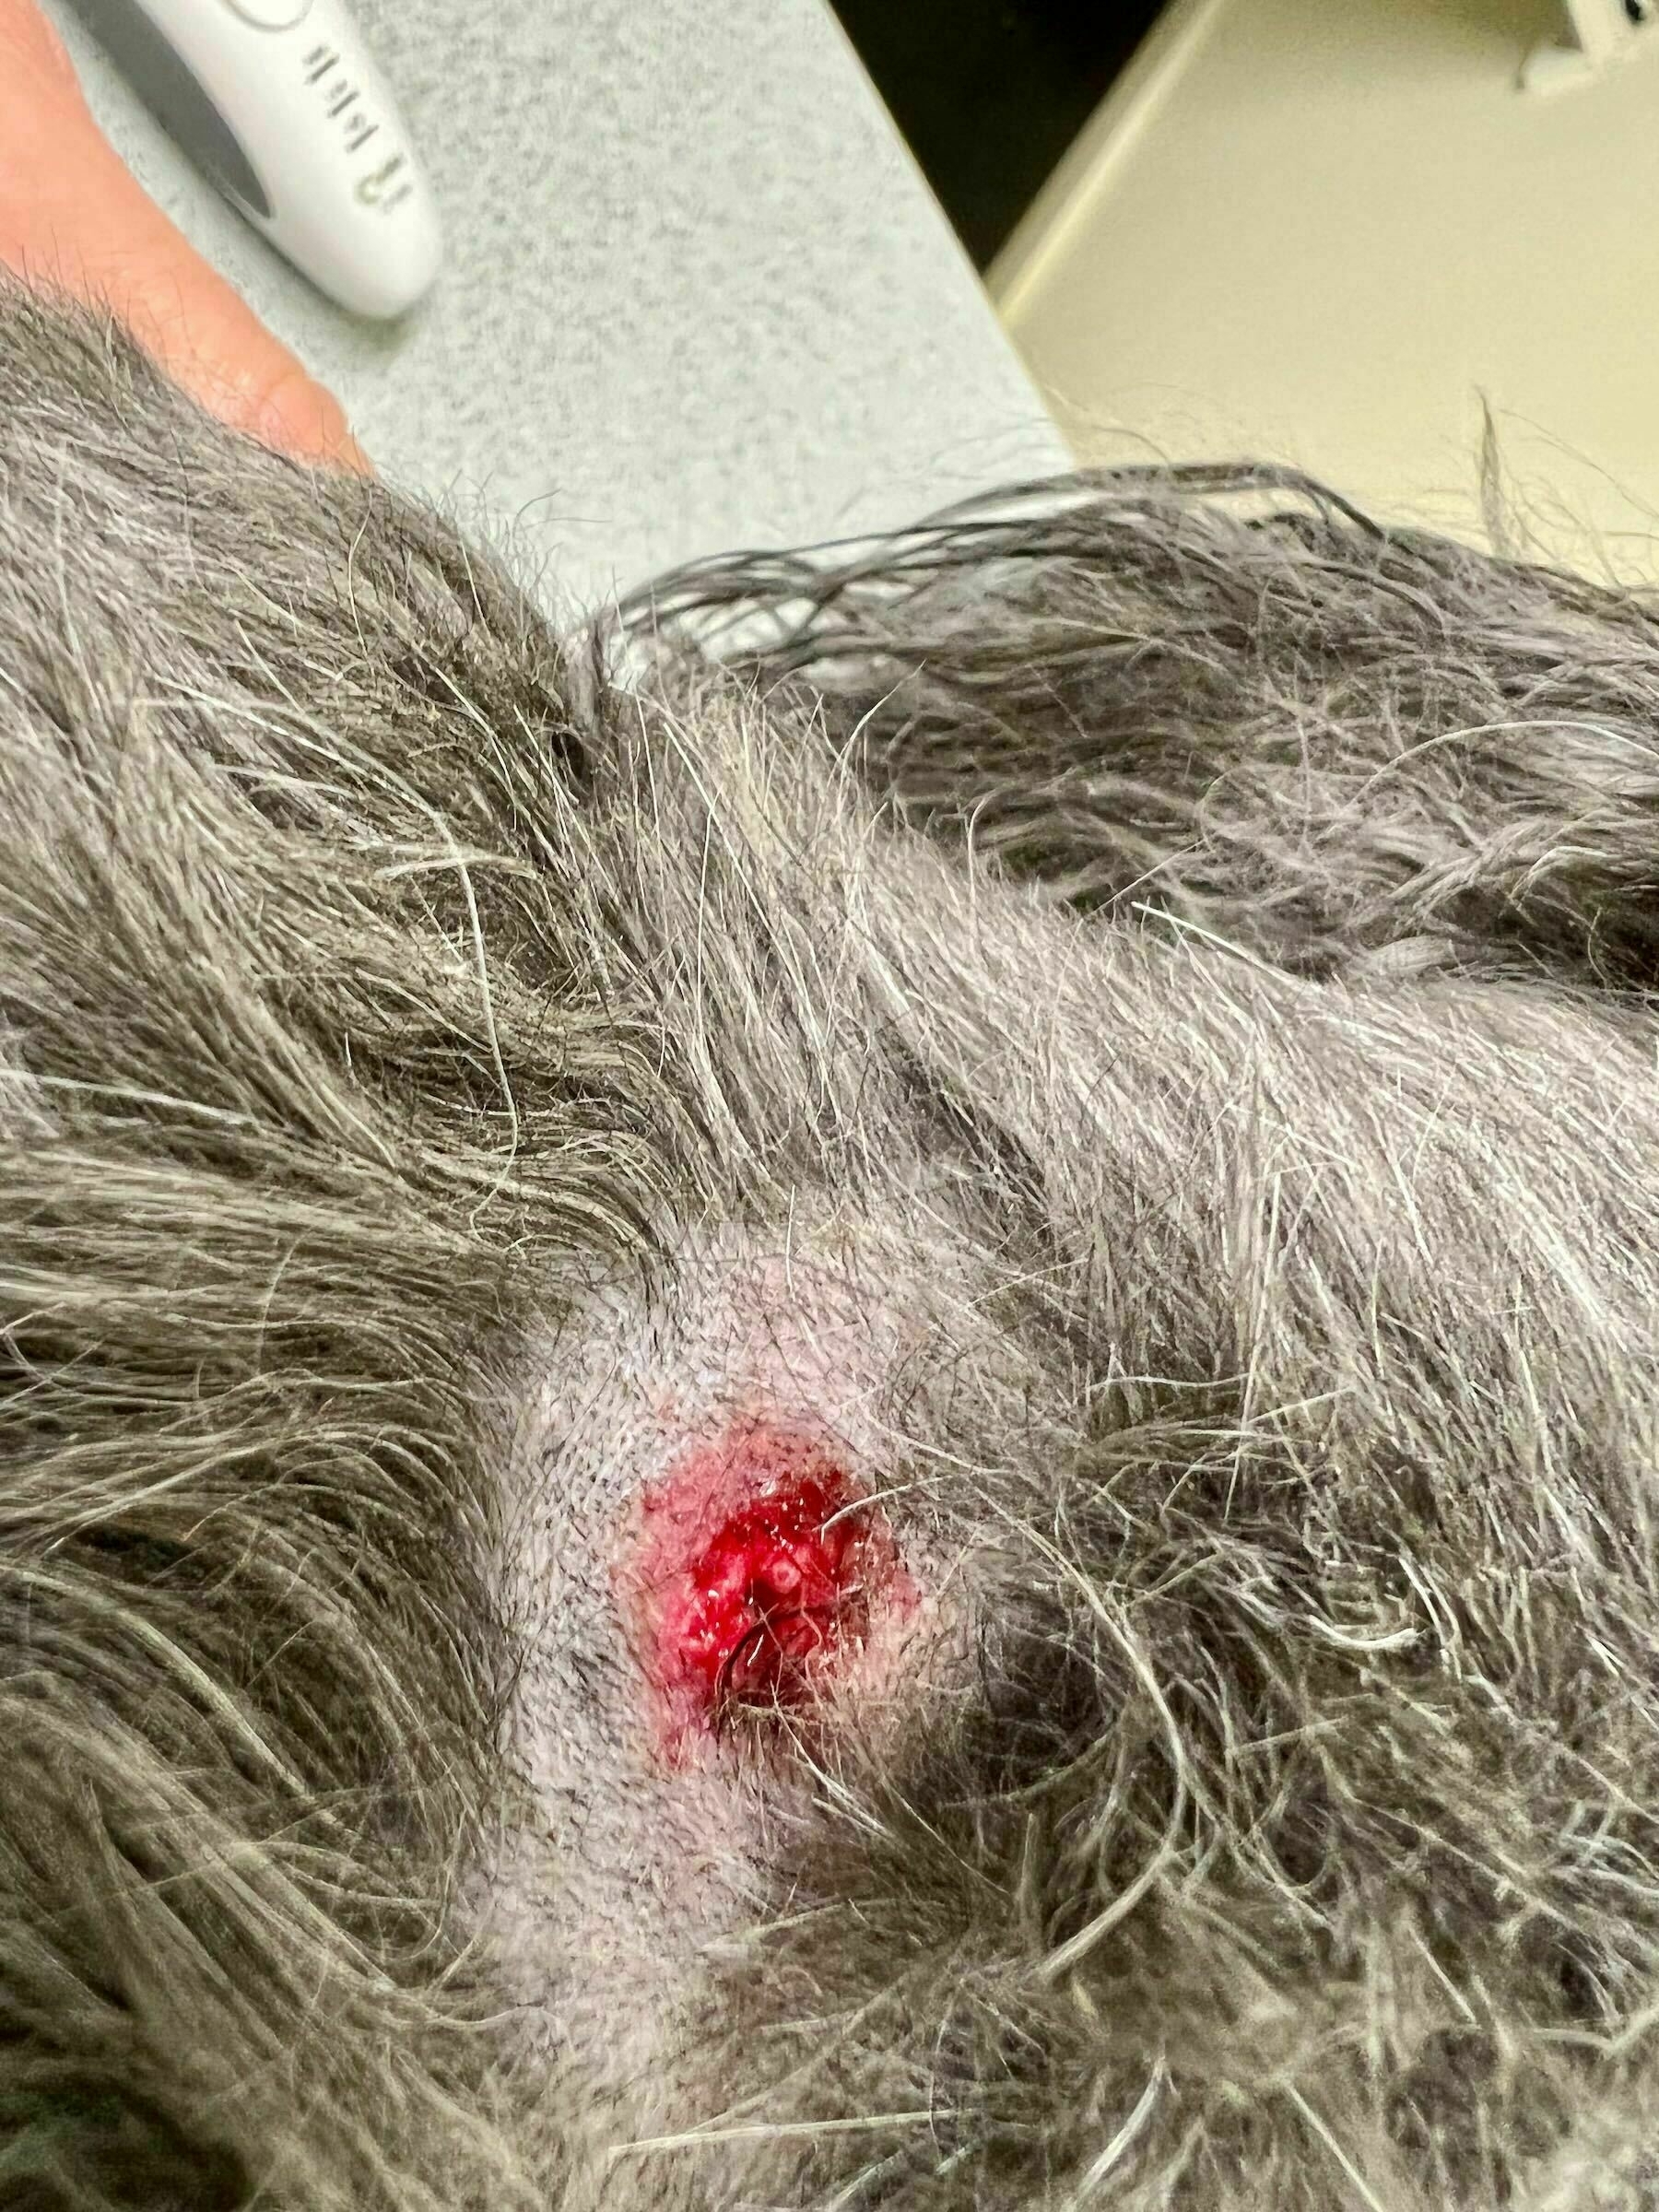 Small open wound on a dog's neck. 